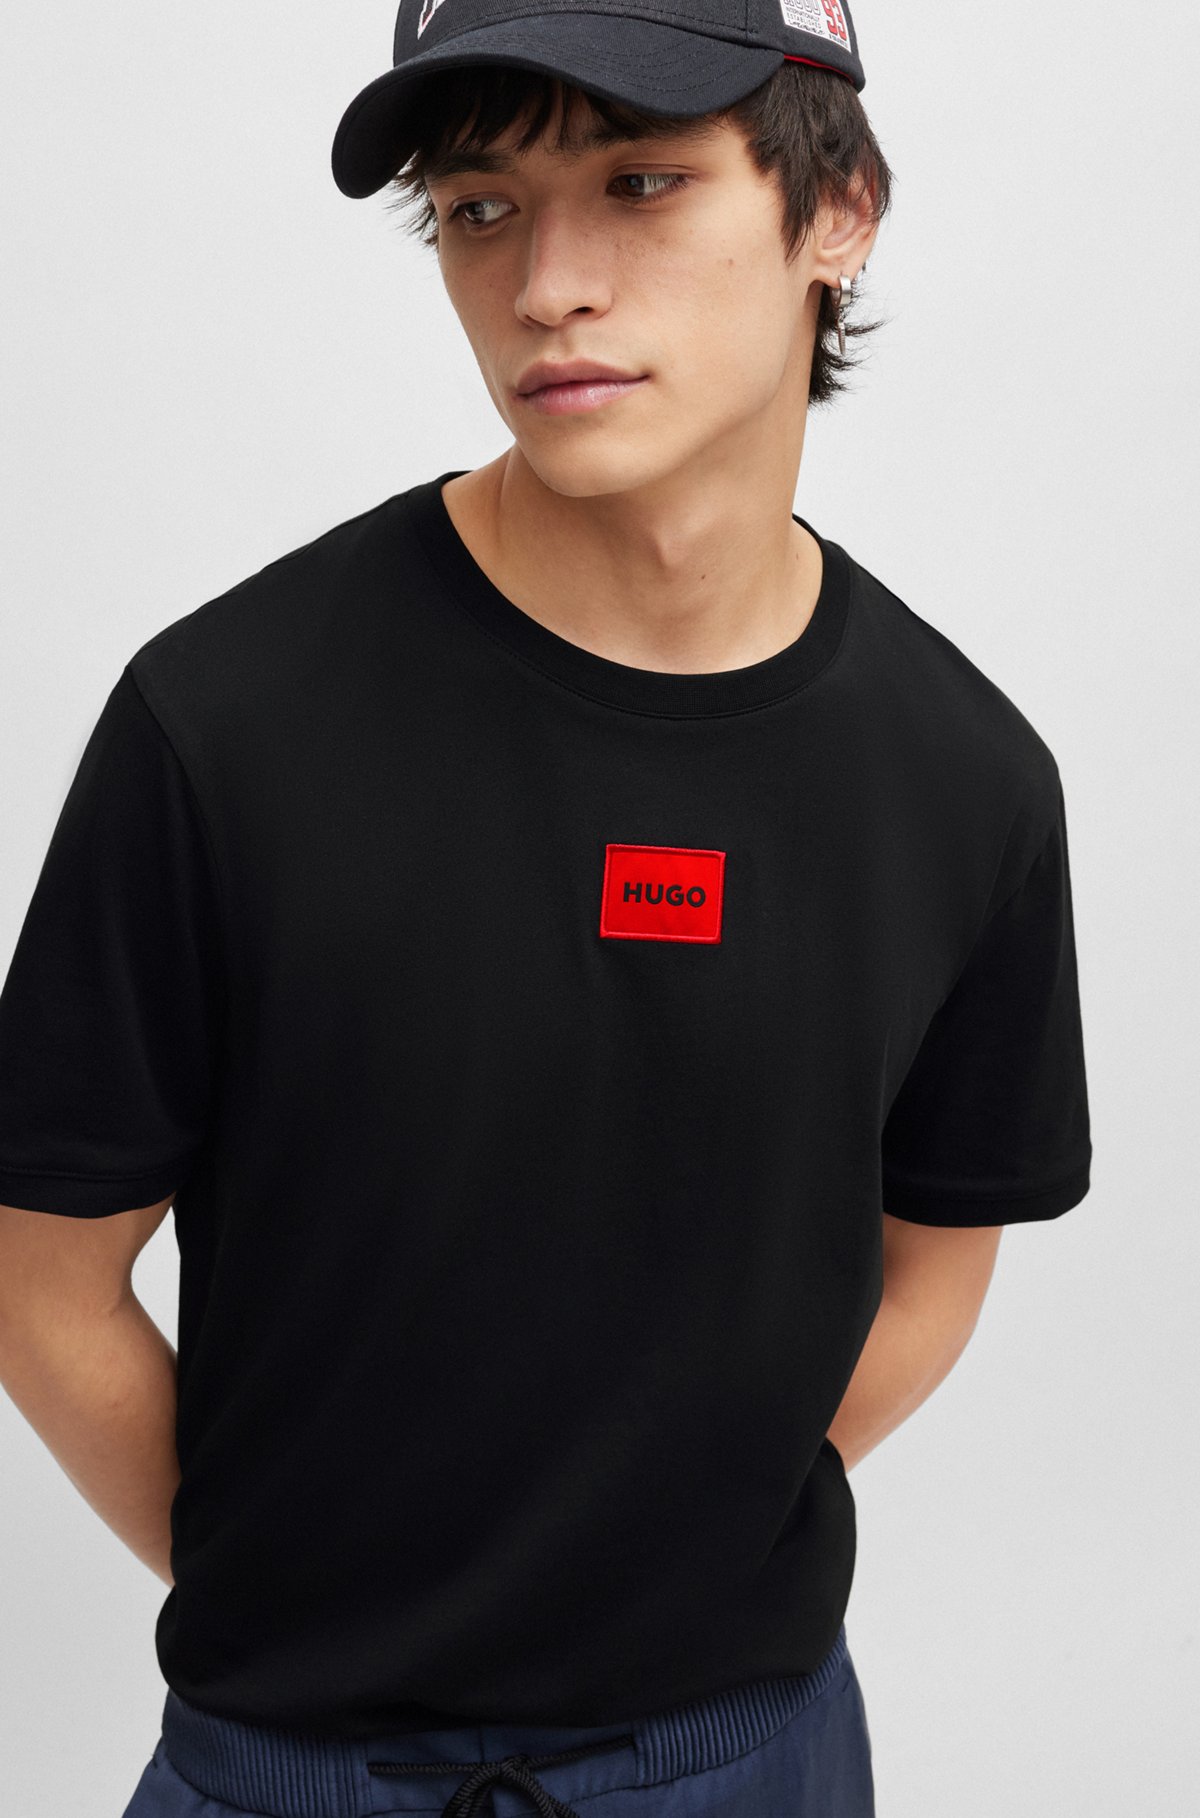 Cotton-jersey T-shirt with logo label, Black